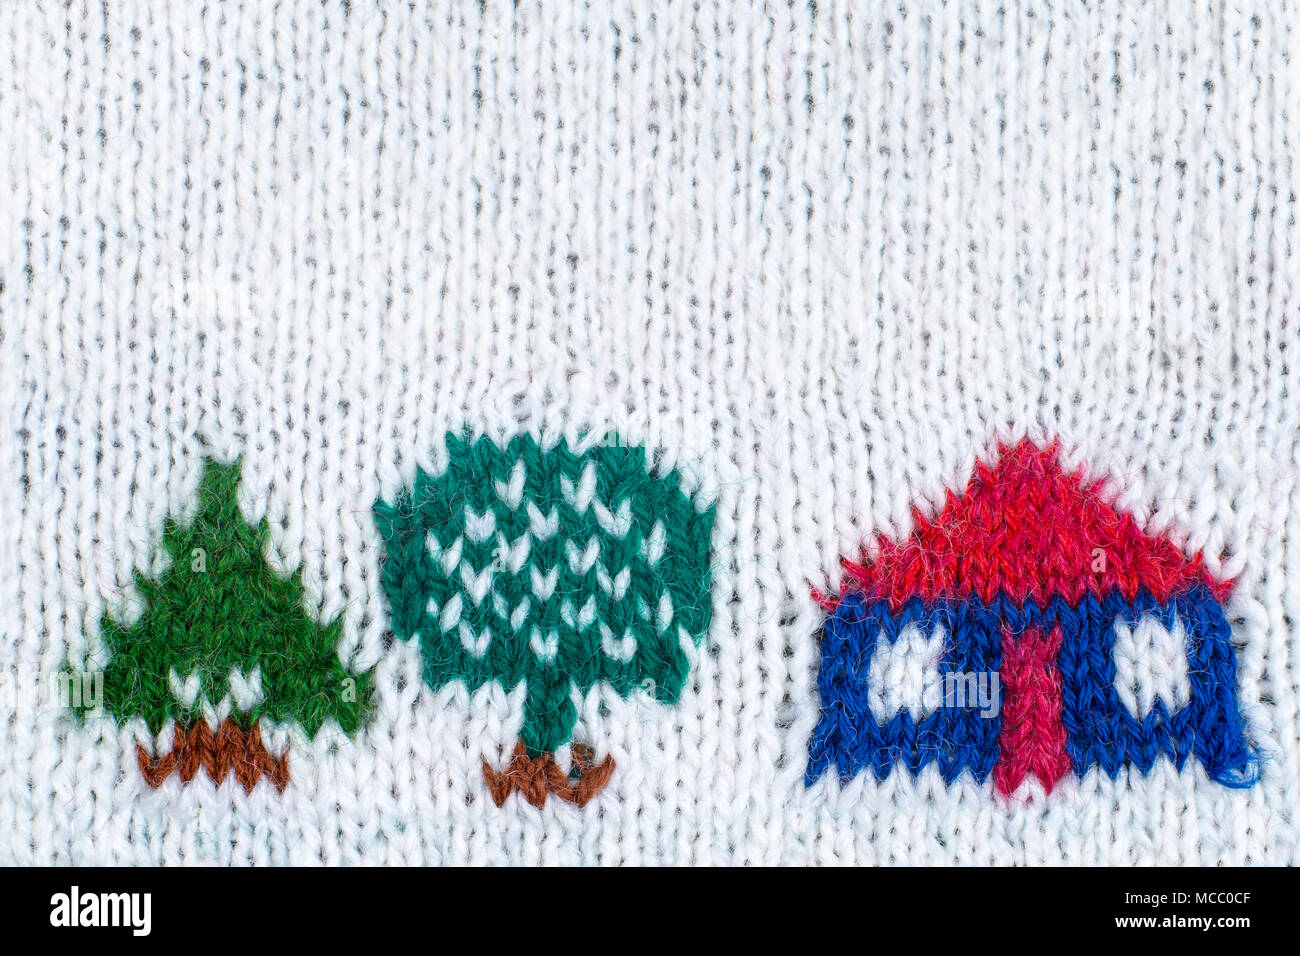 Knitted house with trees on white knitted background. Stock Photo